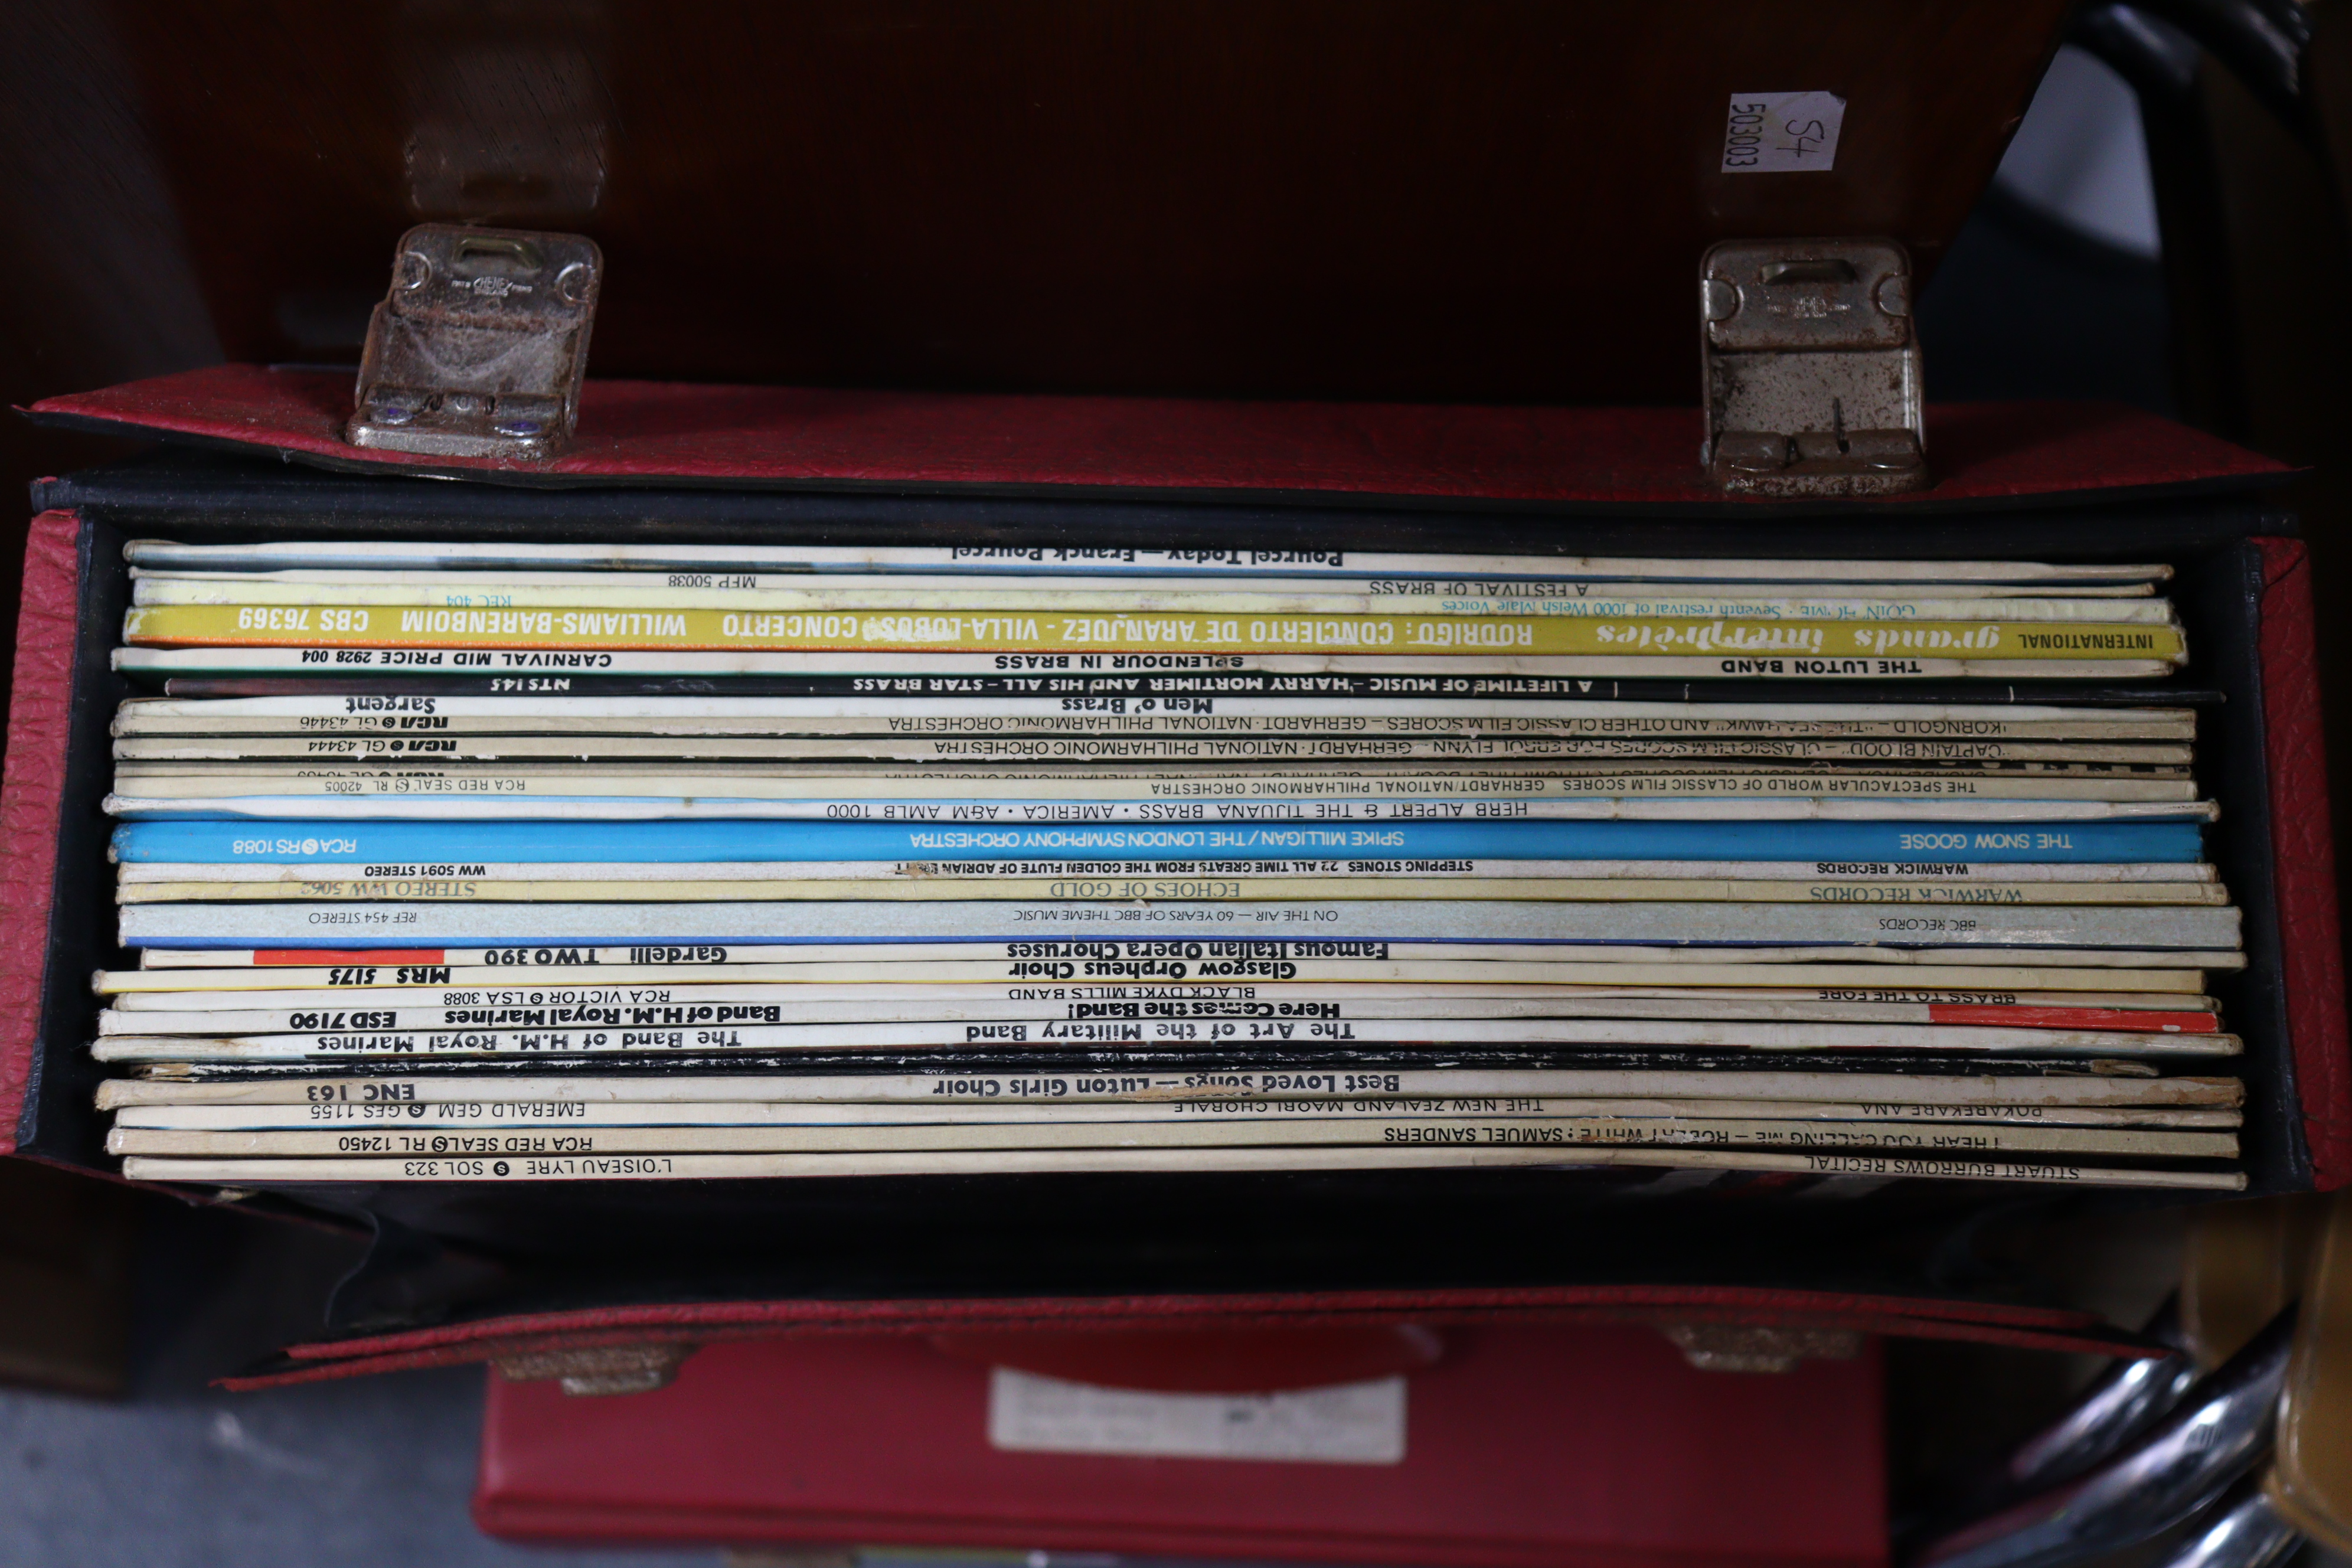 Approximately four hundred various LP records-pop, country, movie soundtracks, etc. - Image 11 of 12